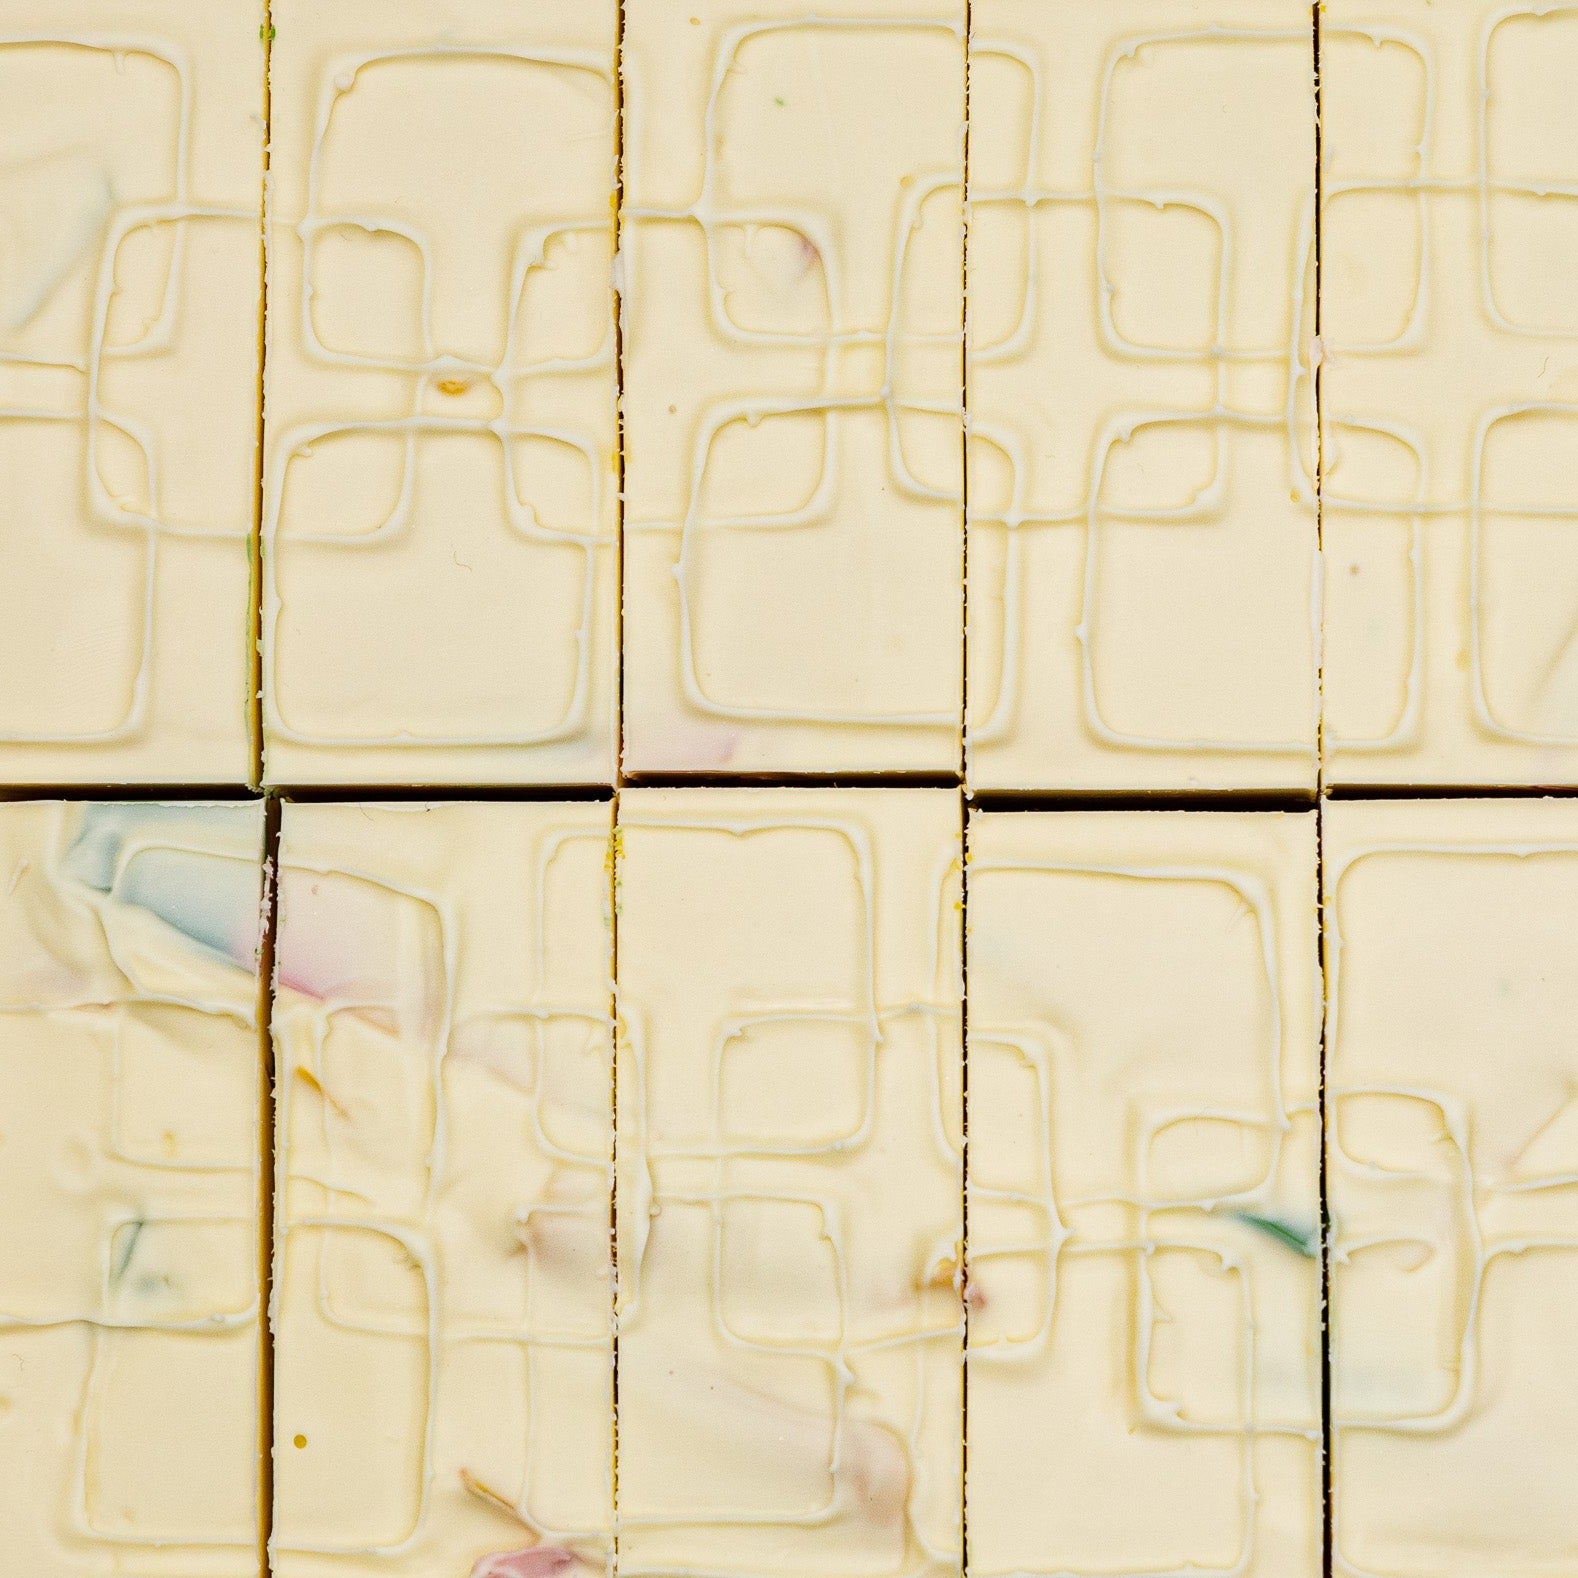 The top of Ginger Ale soap bars showing its retro square pattern design.